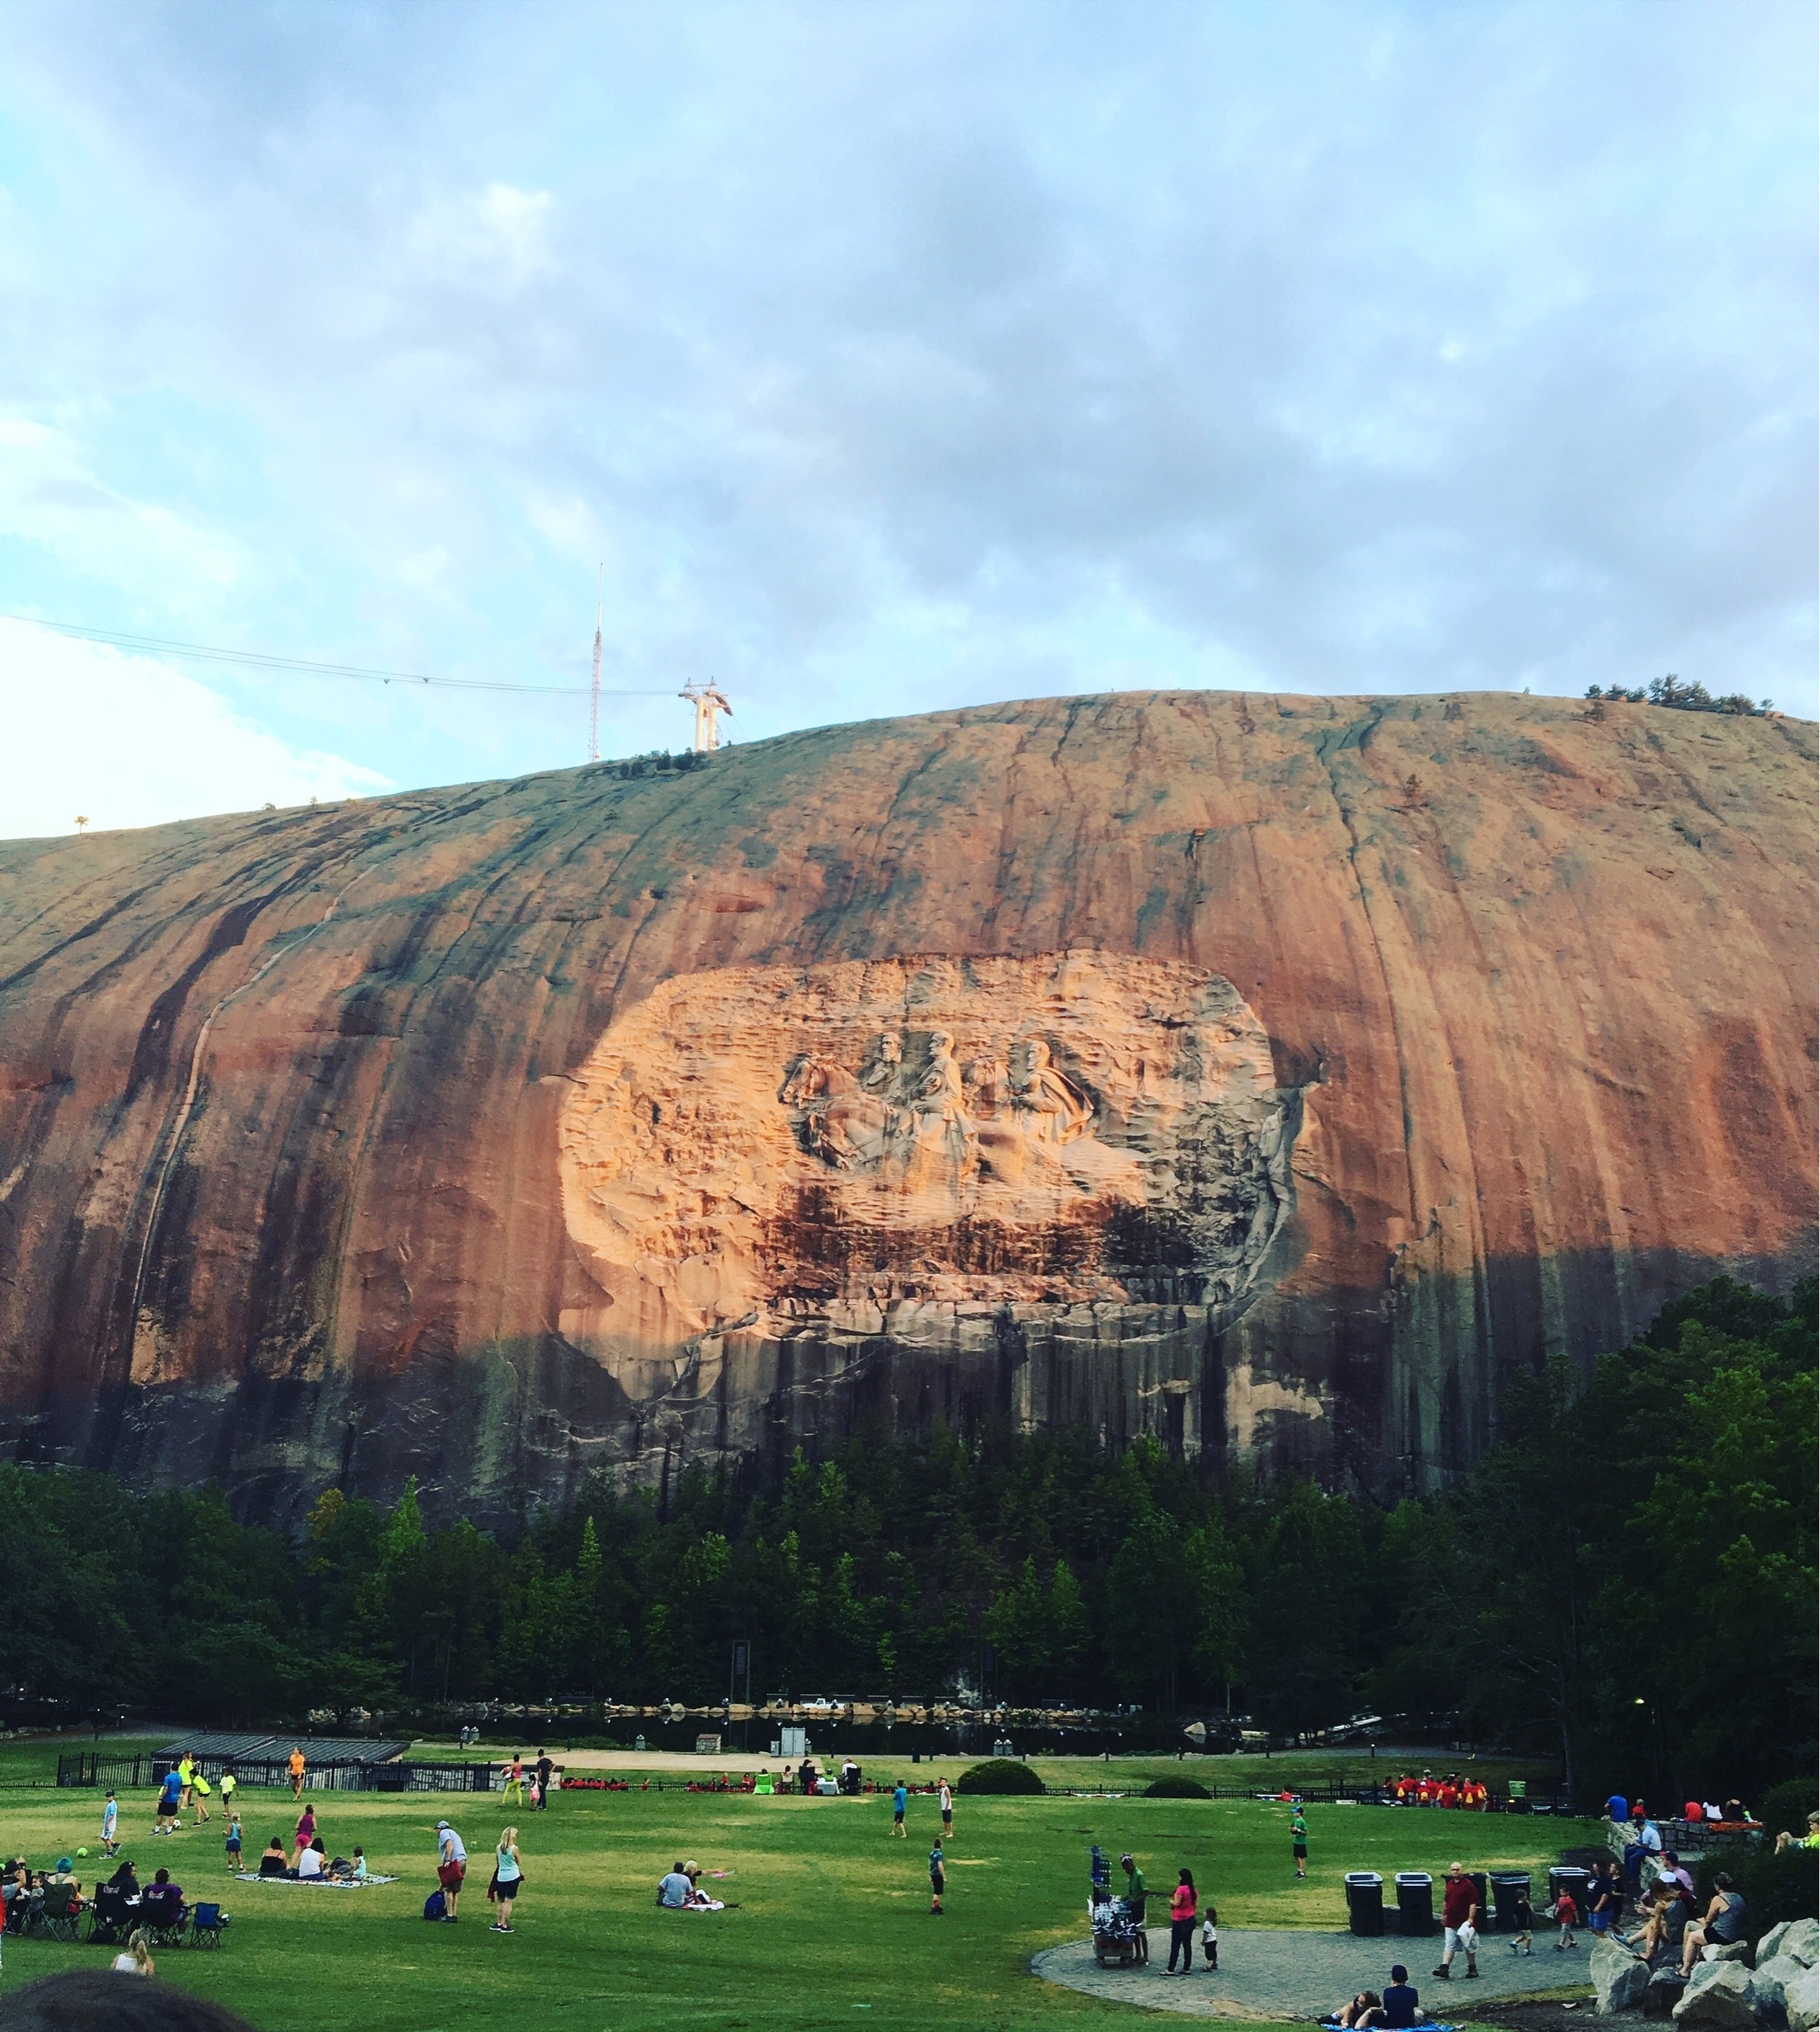 As one watches the sun set over Stone Mountain (controversial Confederate general monument and all), the color of the rock deepens and puts on a beautiful show ❤️ #bruisedpassports